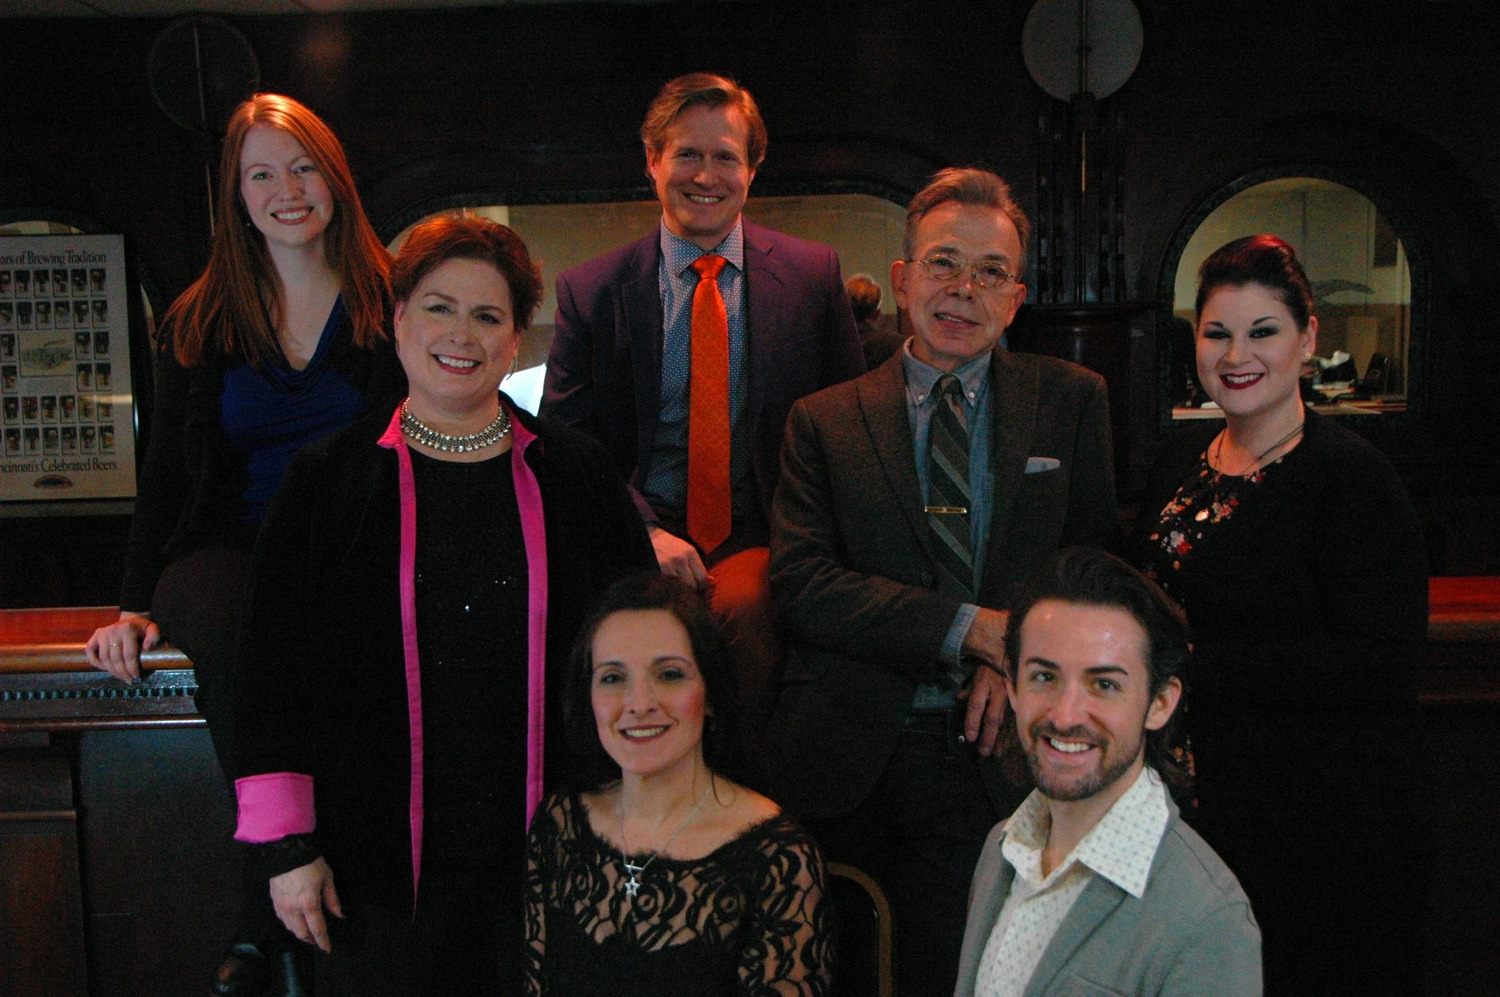 The cast of LOVE IS LOVE: A Cabaret of Broadway Songs About Love.
From Left, Back Row; Katelyn Reid & Brian Anderson,
Center Row; Mary Puetz, Wayne Wright, Bree Hunter Cox,
Front Row; Pamela K. Day, & Luka Ashley Carter.
Photo Credit: Mark D. Motz/Cincinnati Music Theatre 1